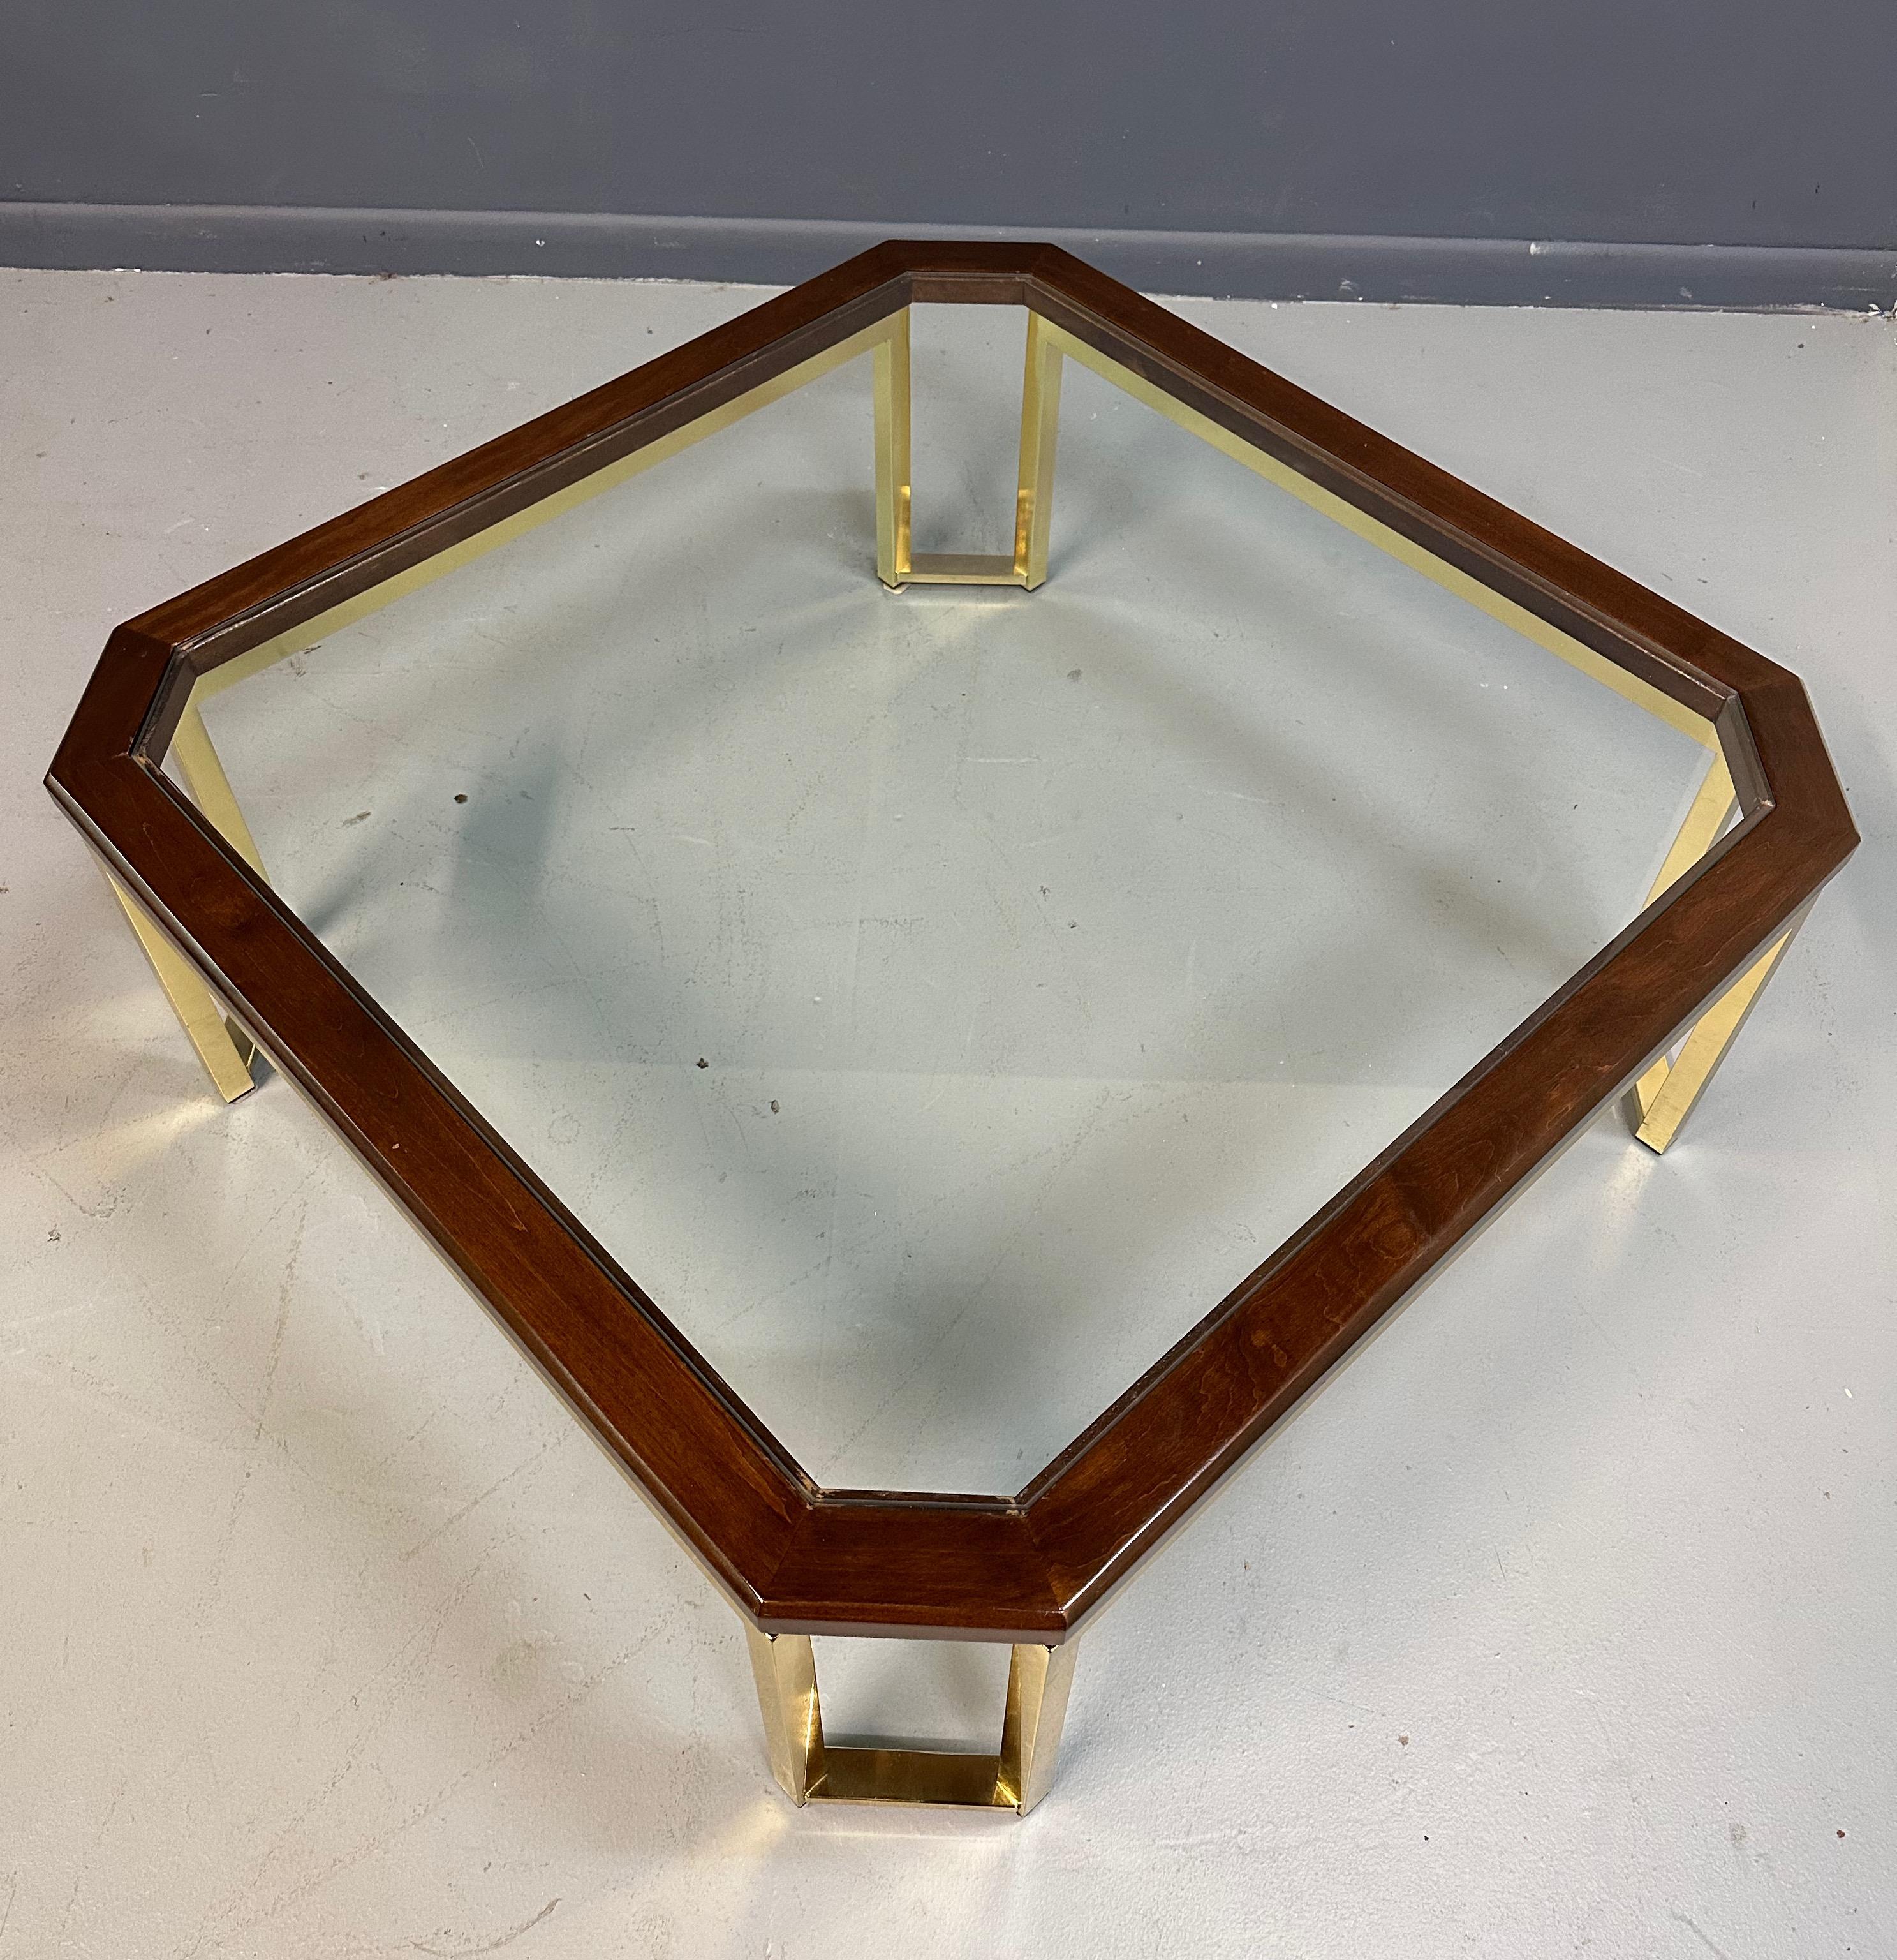 Quintessential modern designed table by the wonderful firm of Design Institute of America. This table features a mahogany surround sitting on a brass base with glass in the center. The brass tubes that circle the entire piece and lift the wood above